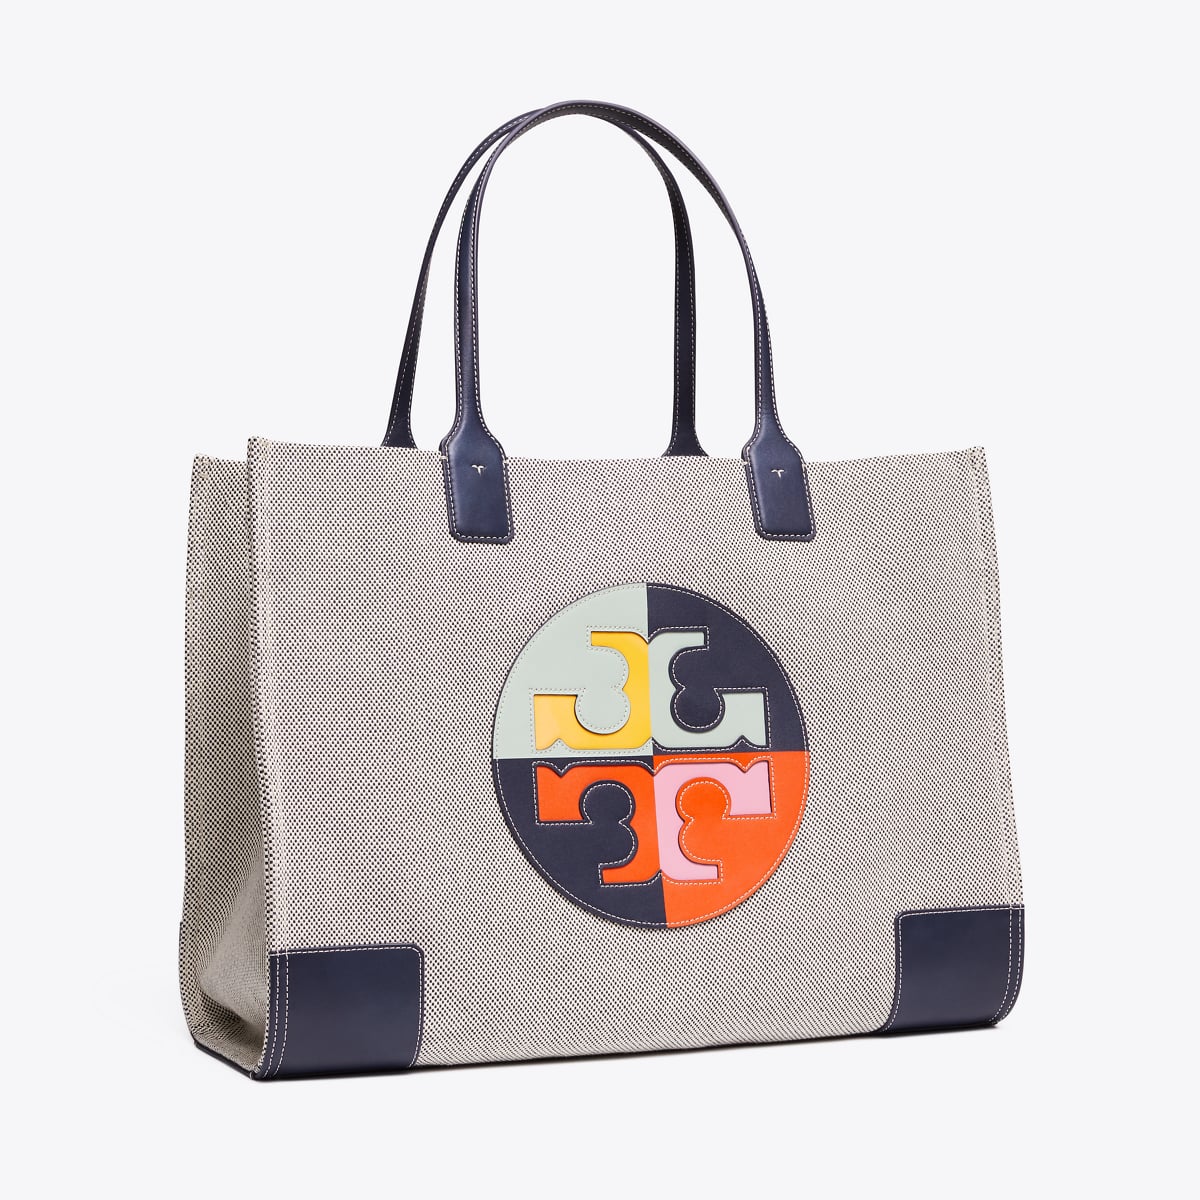 Tory Burch Ella Color-Block Tote | Selena Gomez's Sporty Airport Look Is  All We Want to Wear — Especially Those White Sneakers | POPSUGAR Fashion  Photo 19